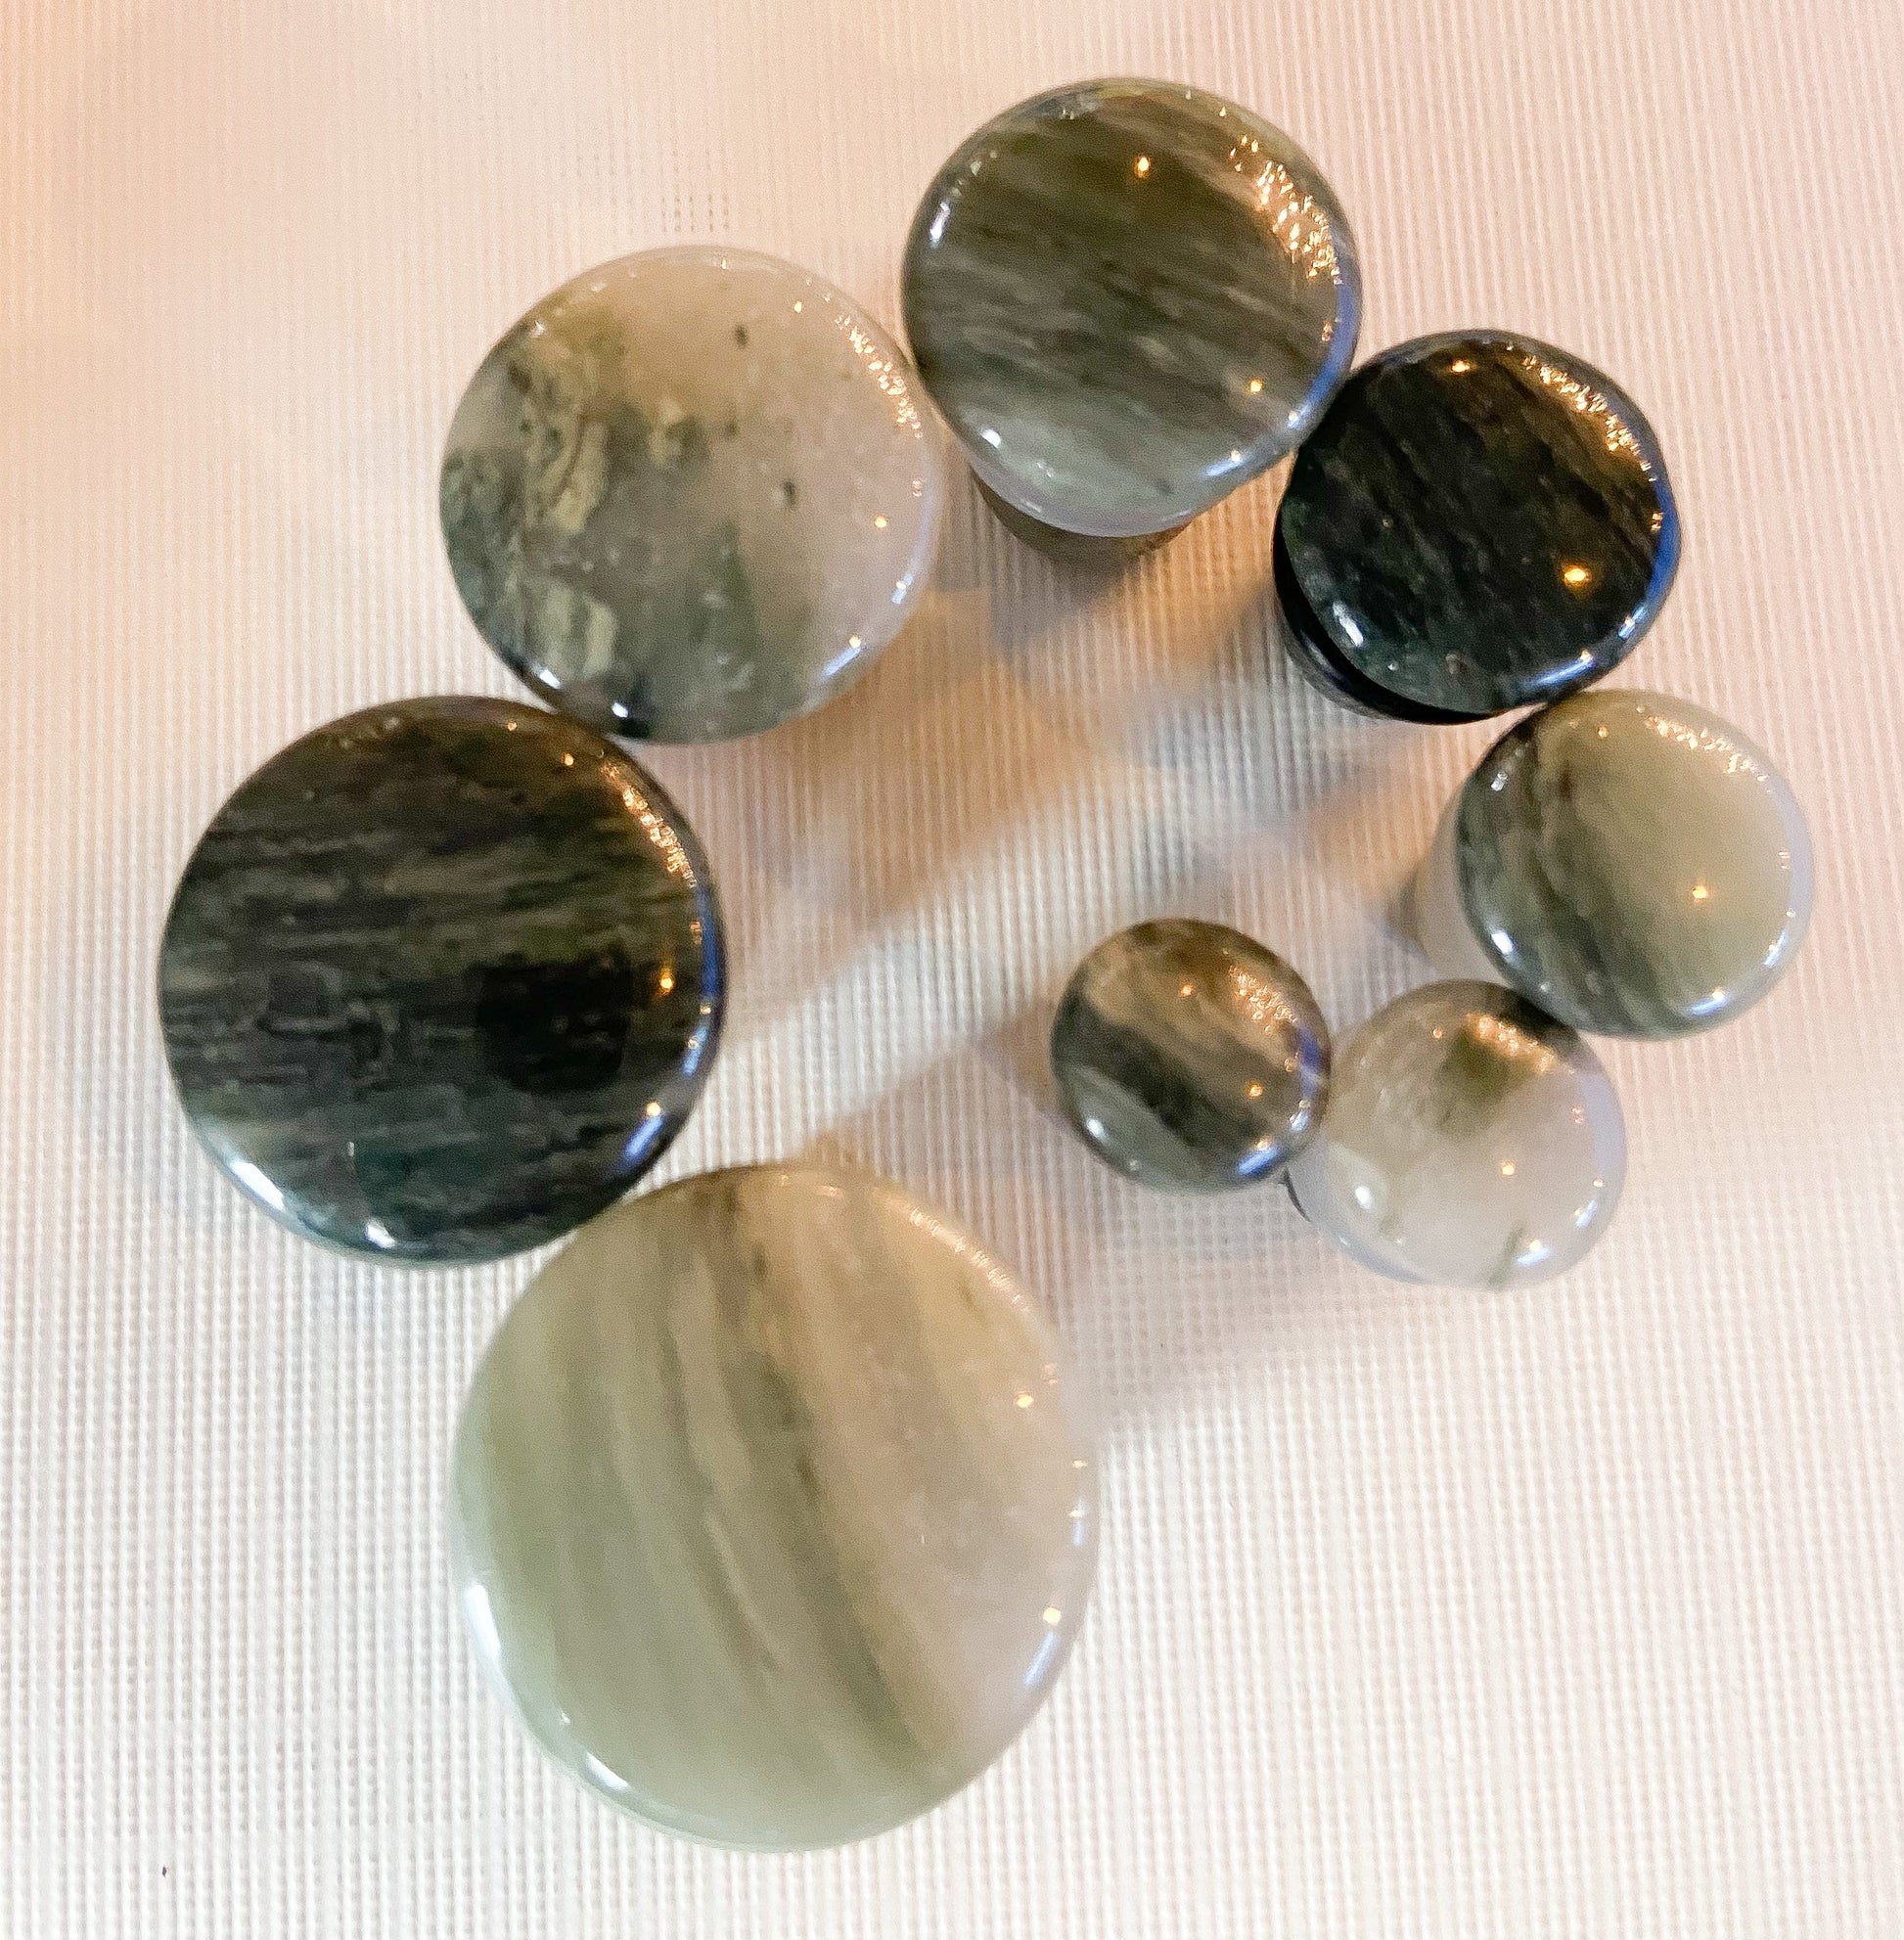 PAIR of Beautiful Organic Single Flare Green Jasper Stone Plugs with O-Rings - Gauges 4g (5mm) up to 5/8" (16mm) available!